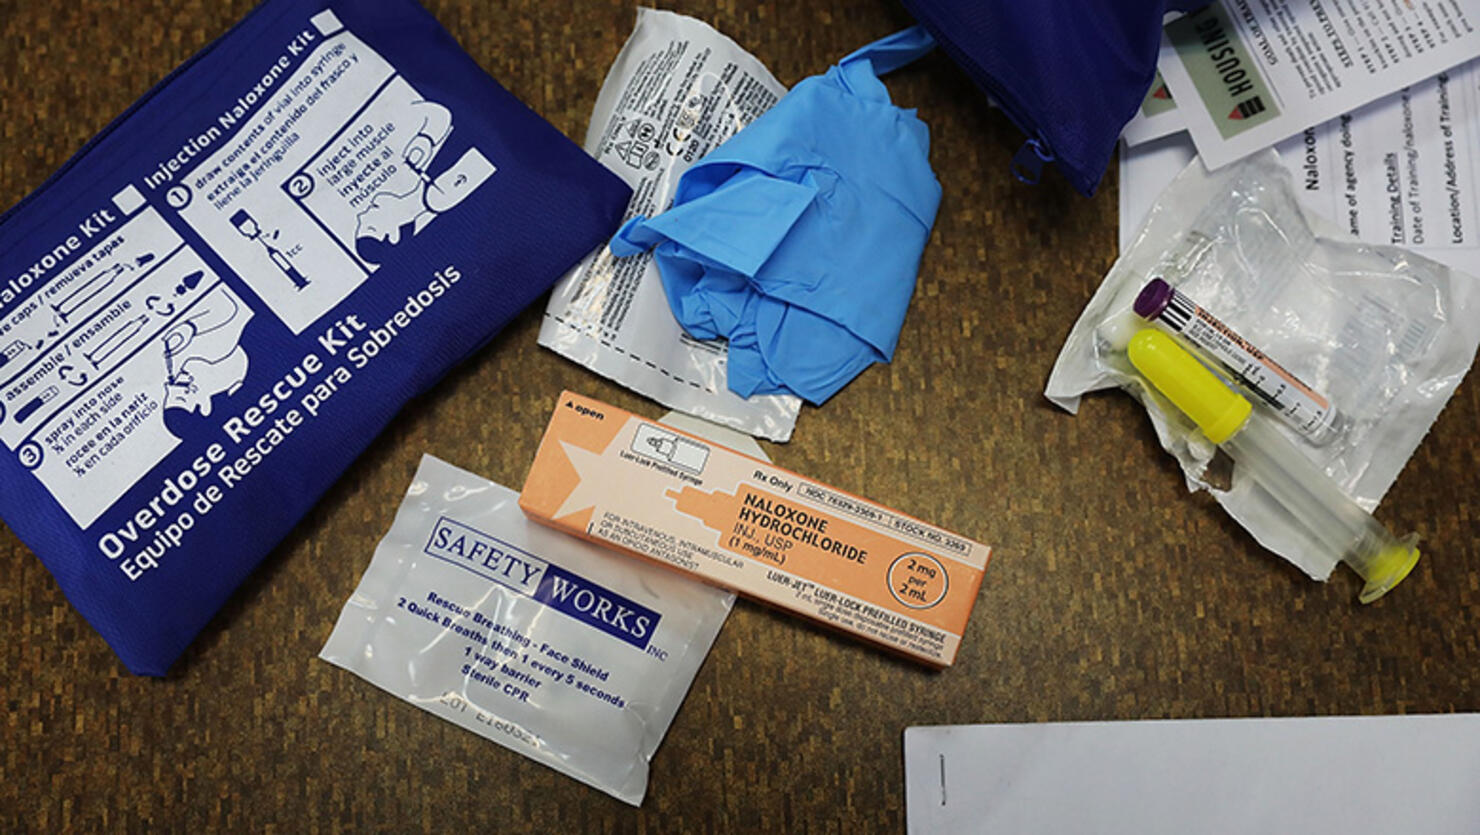 The contents of an overdose rescue kit are displayed in a class on overdose prevention held by non-profit Positive Health Project